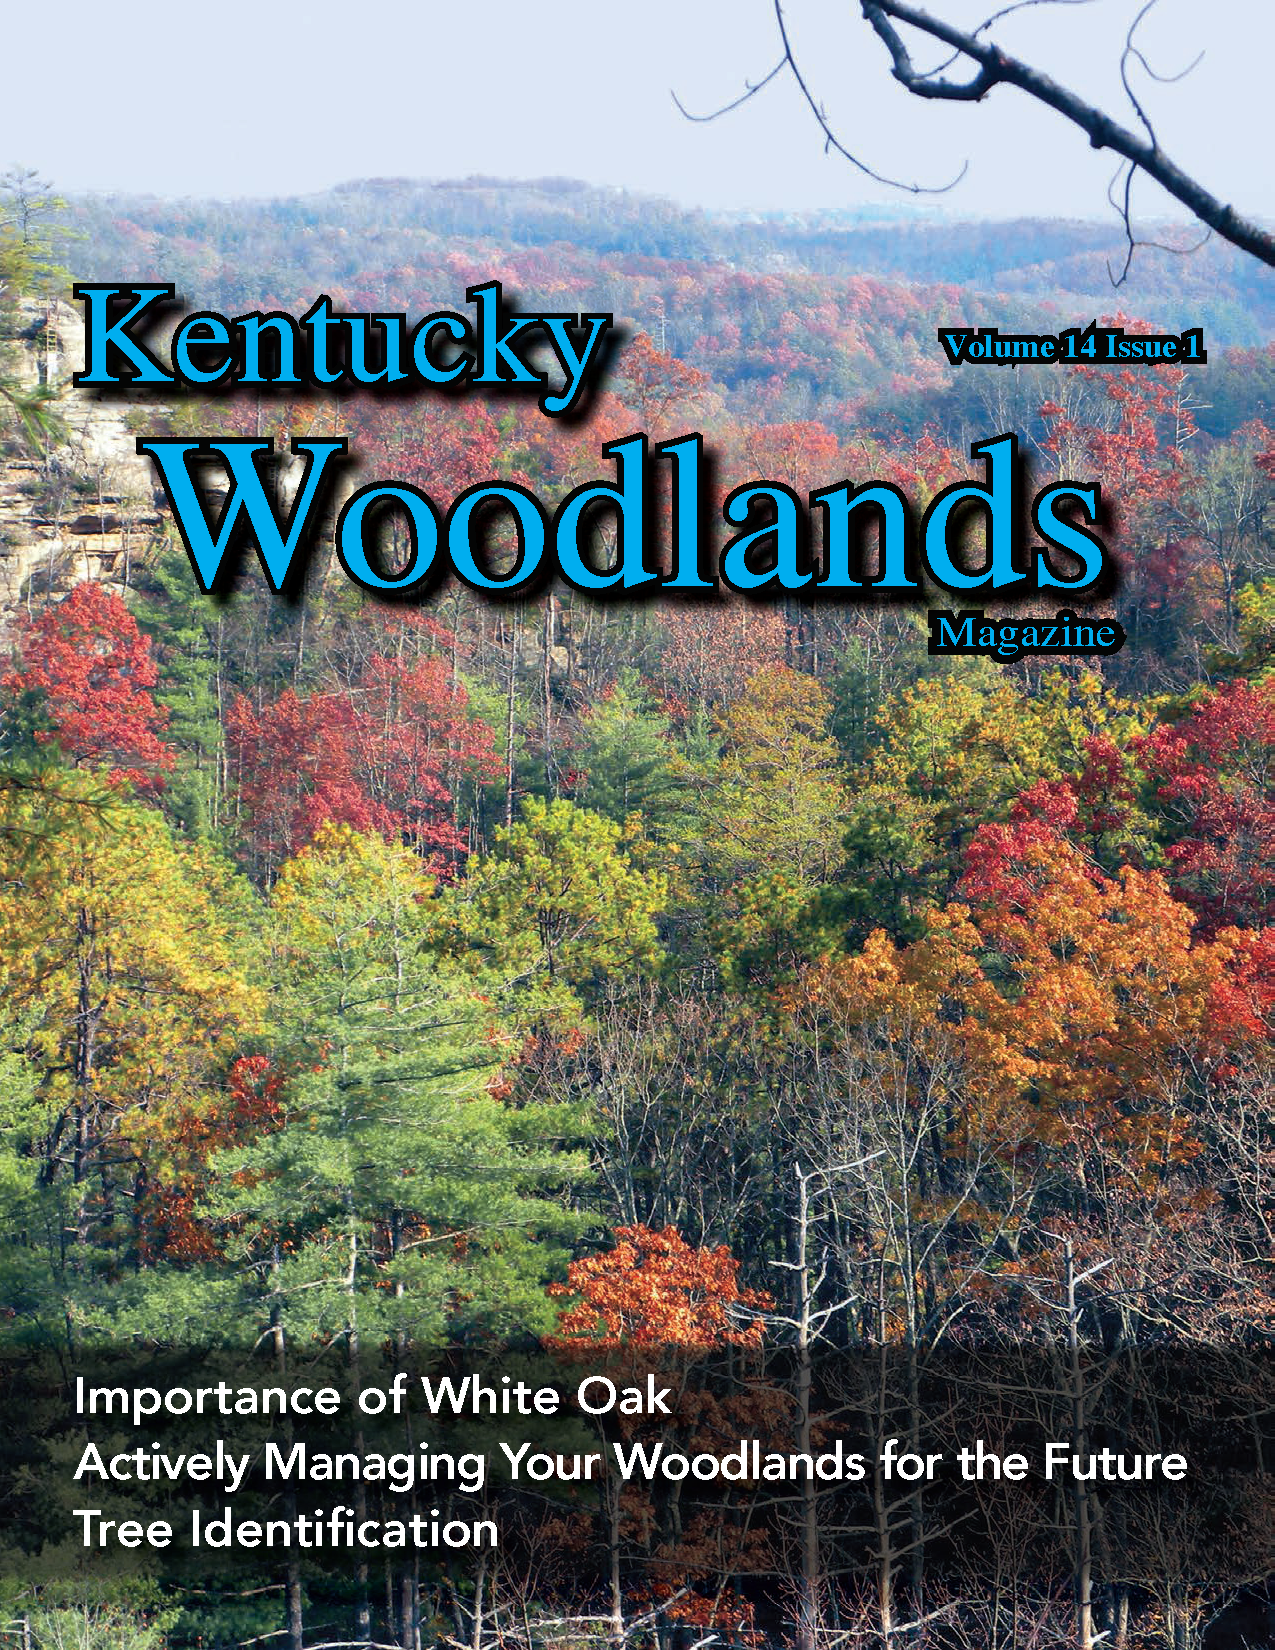 Kentucky Woodlands Magazgine, Volume 14, Issue 1 Cover